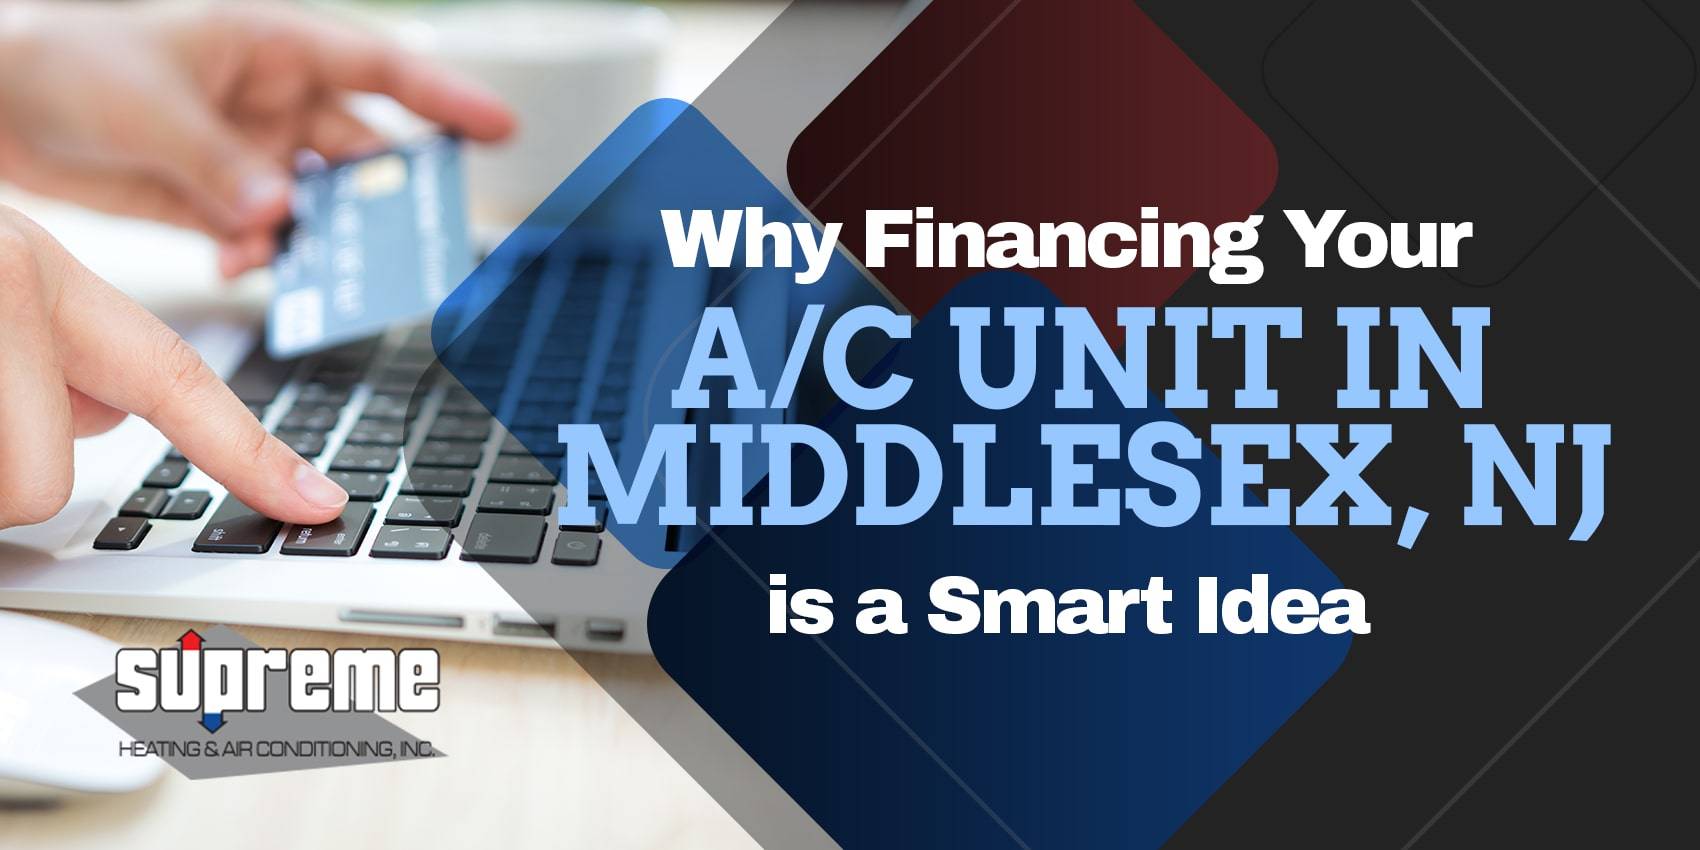 Why Financing A/C Unit in Middlesex, NJ is a Smart Idea